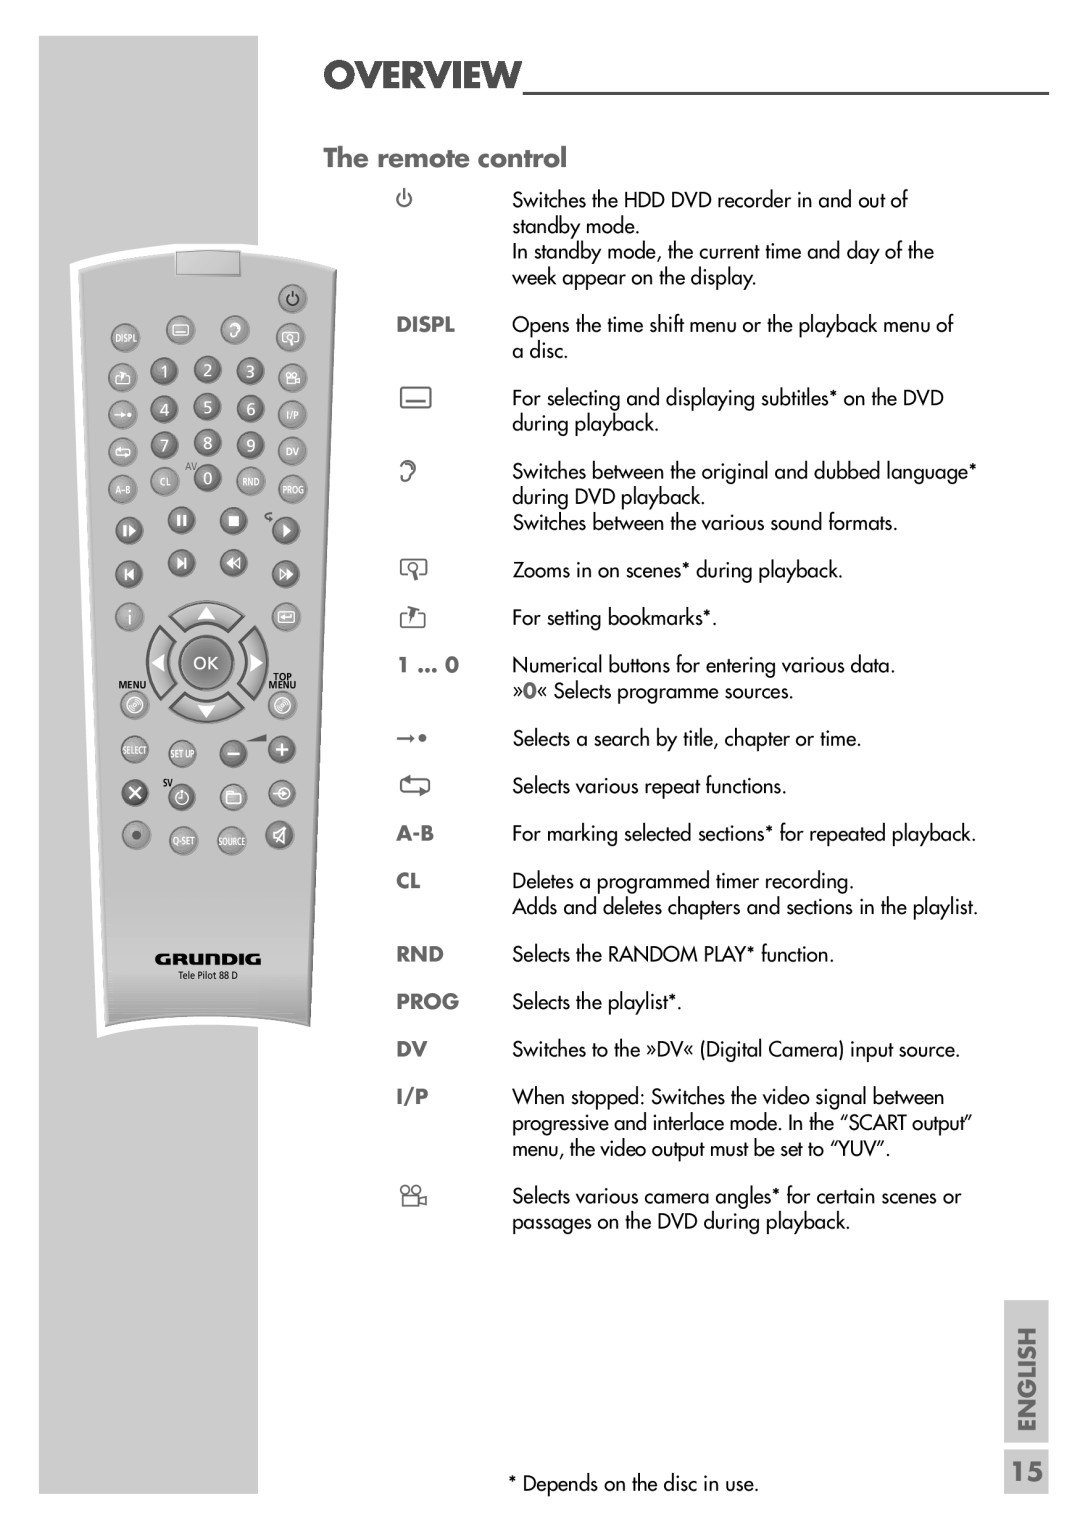 Grundig 5550 HDD manual The remote control, Overview, English, When stopped Switches the video signal between 